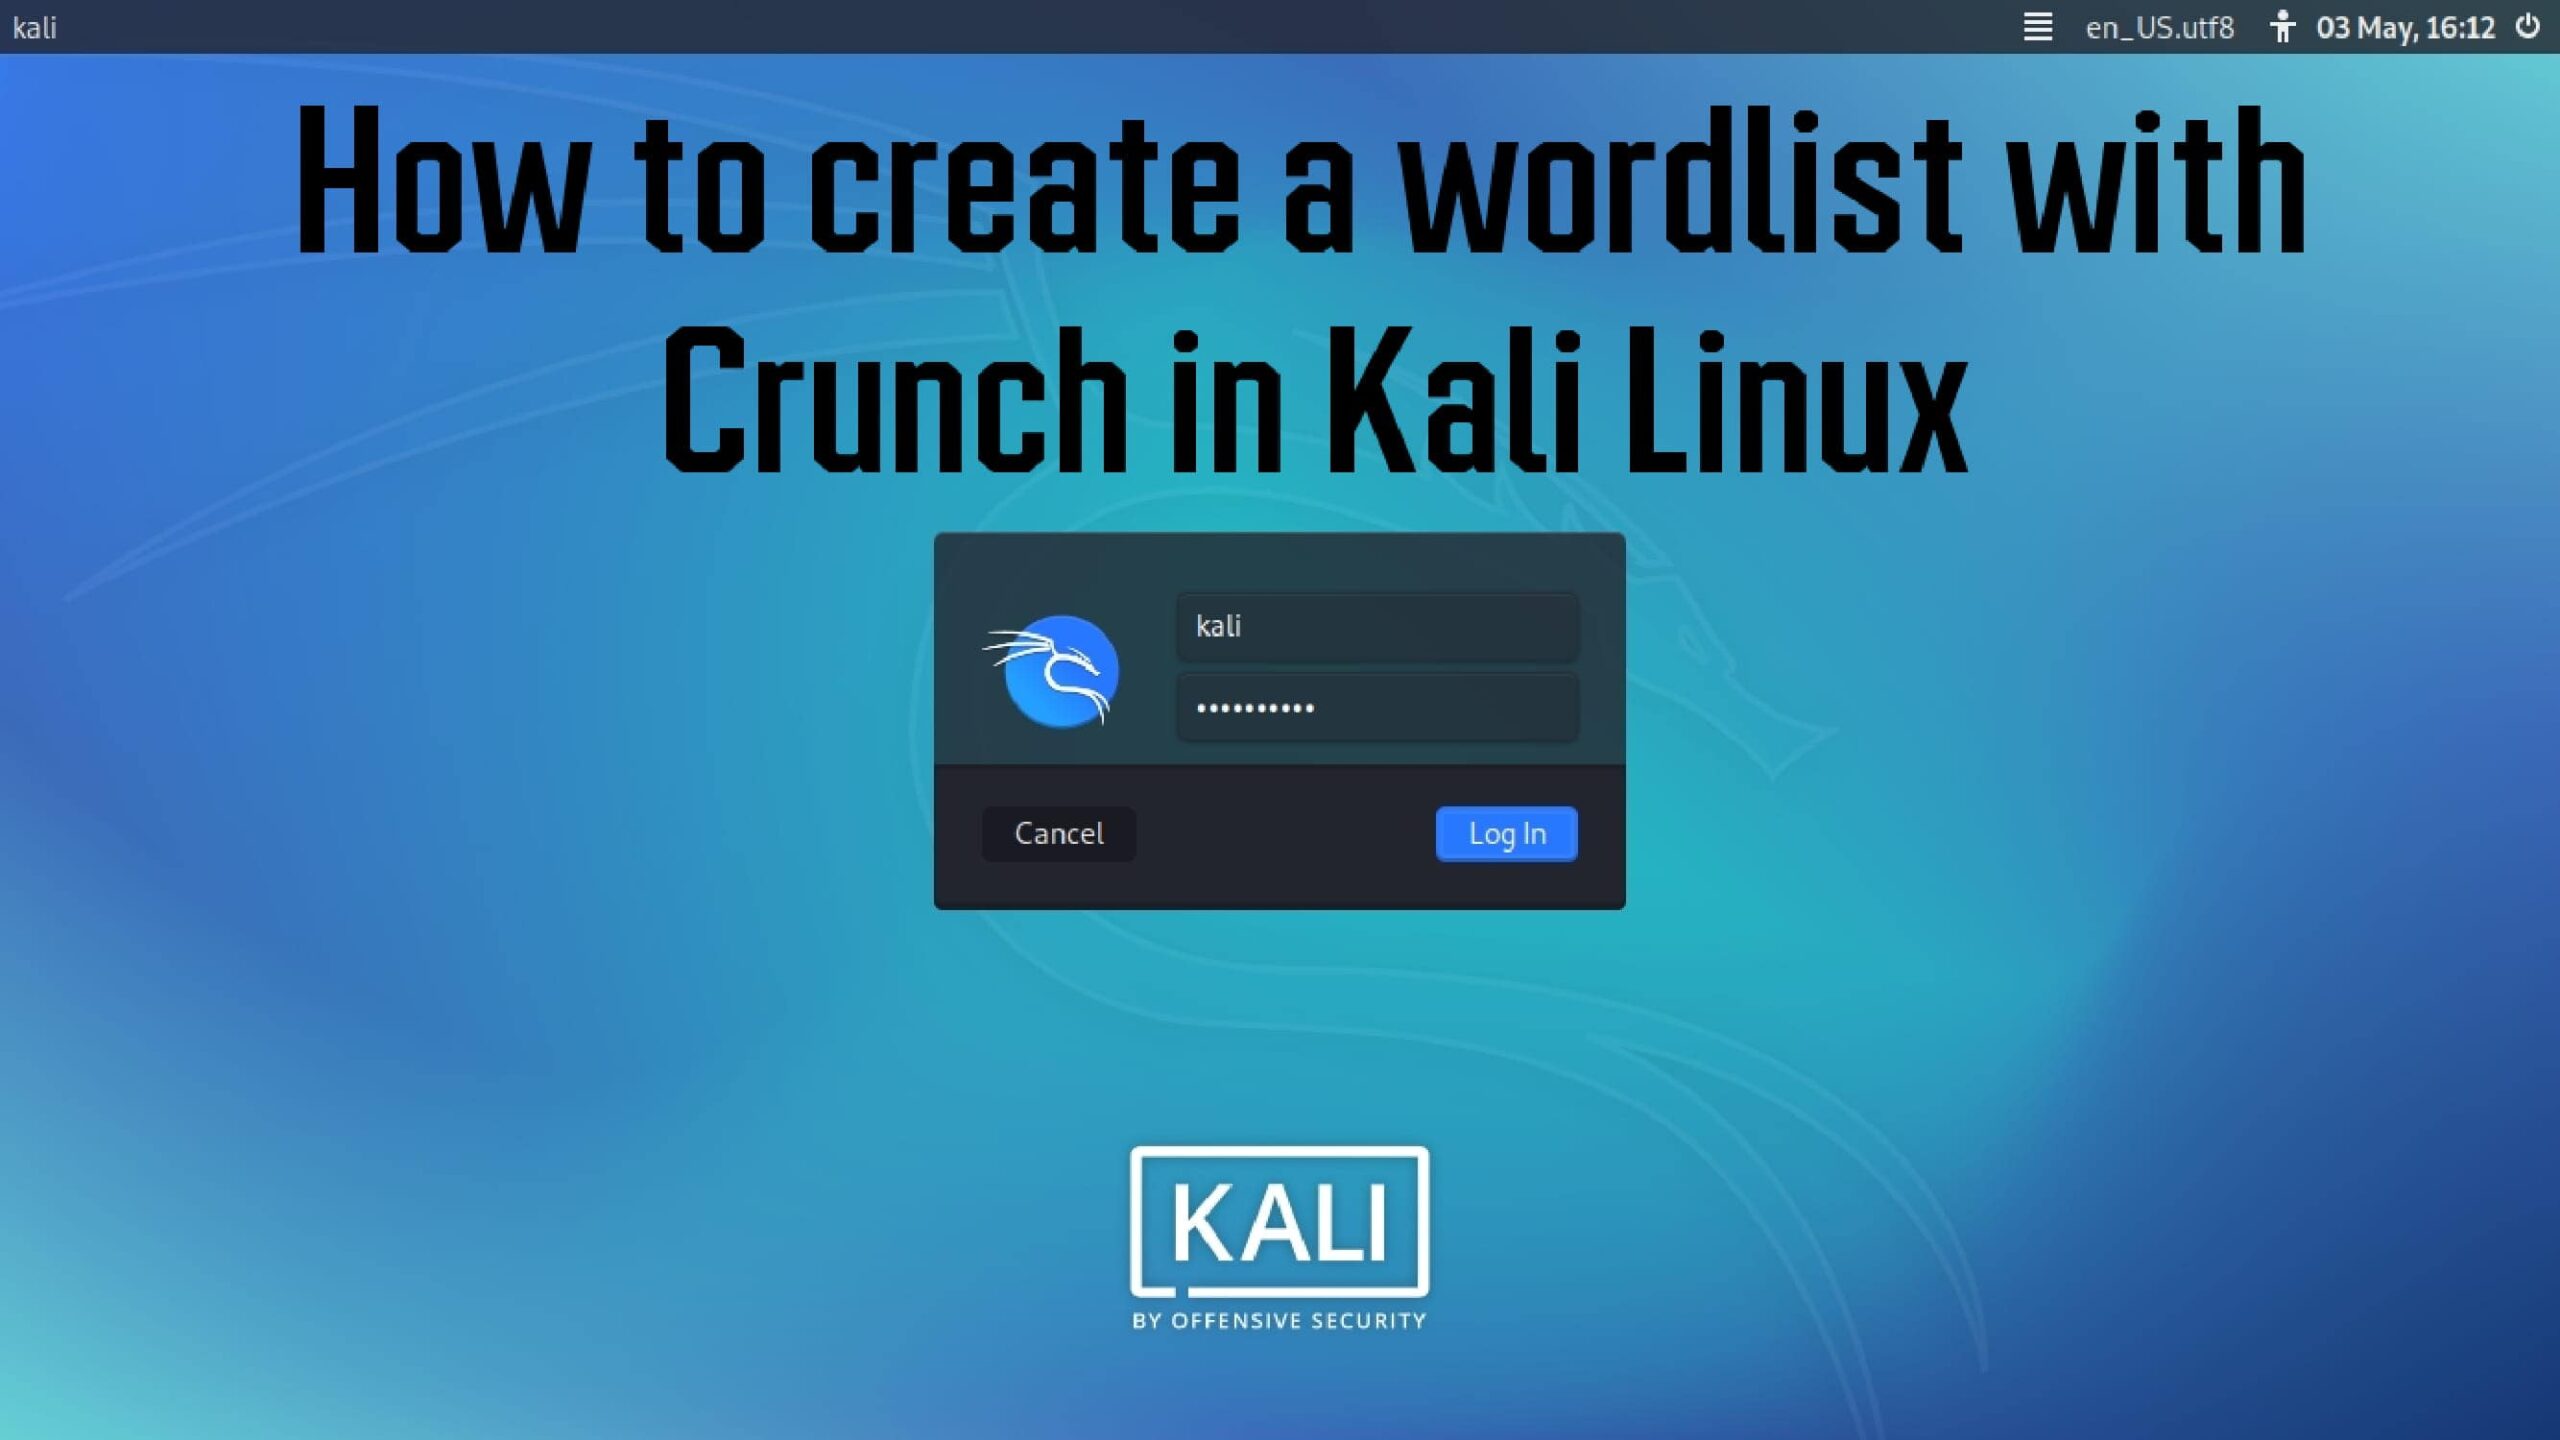 How to create a wordlist with Crunch in Kali Linux